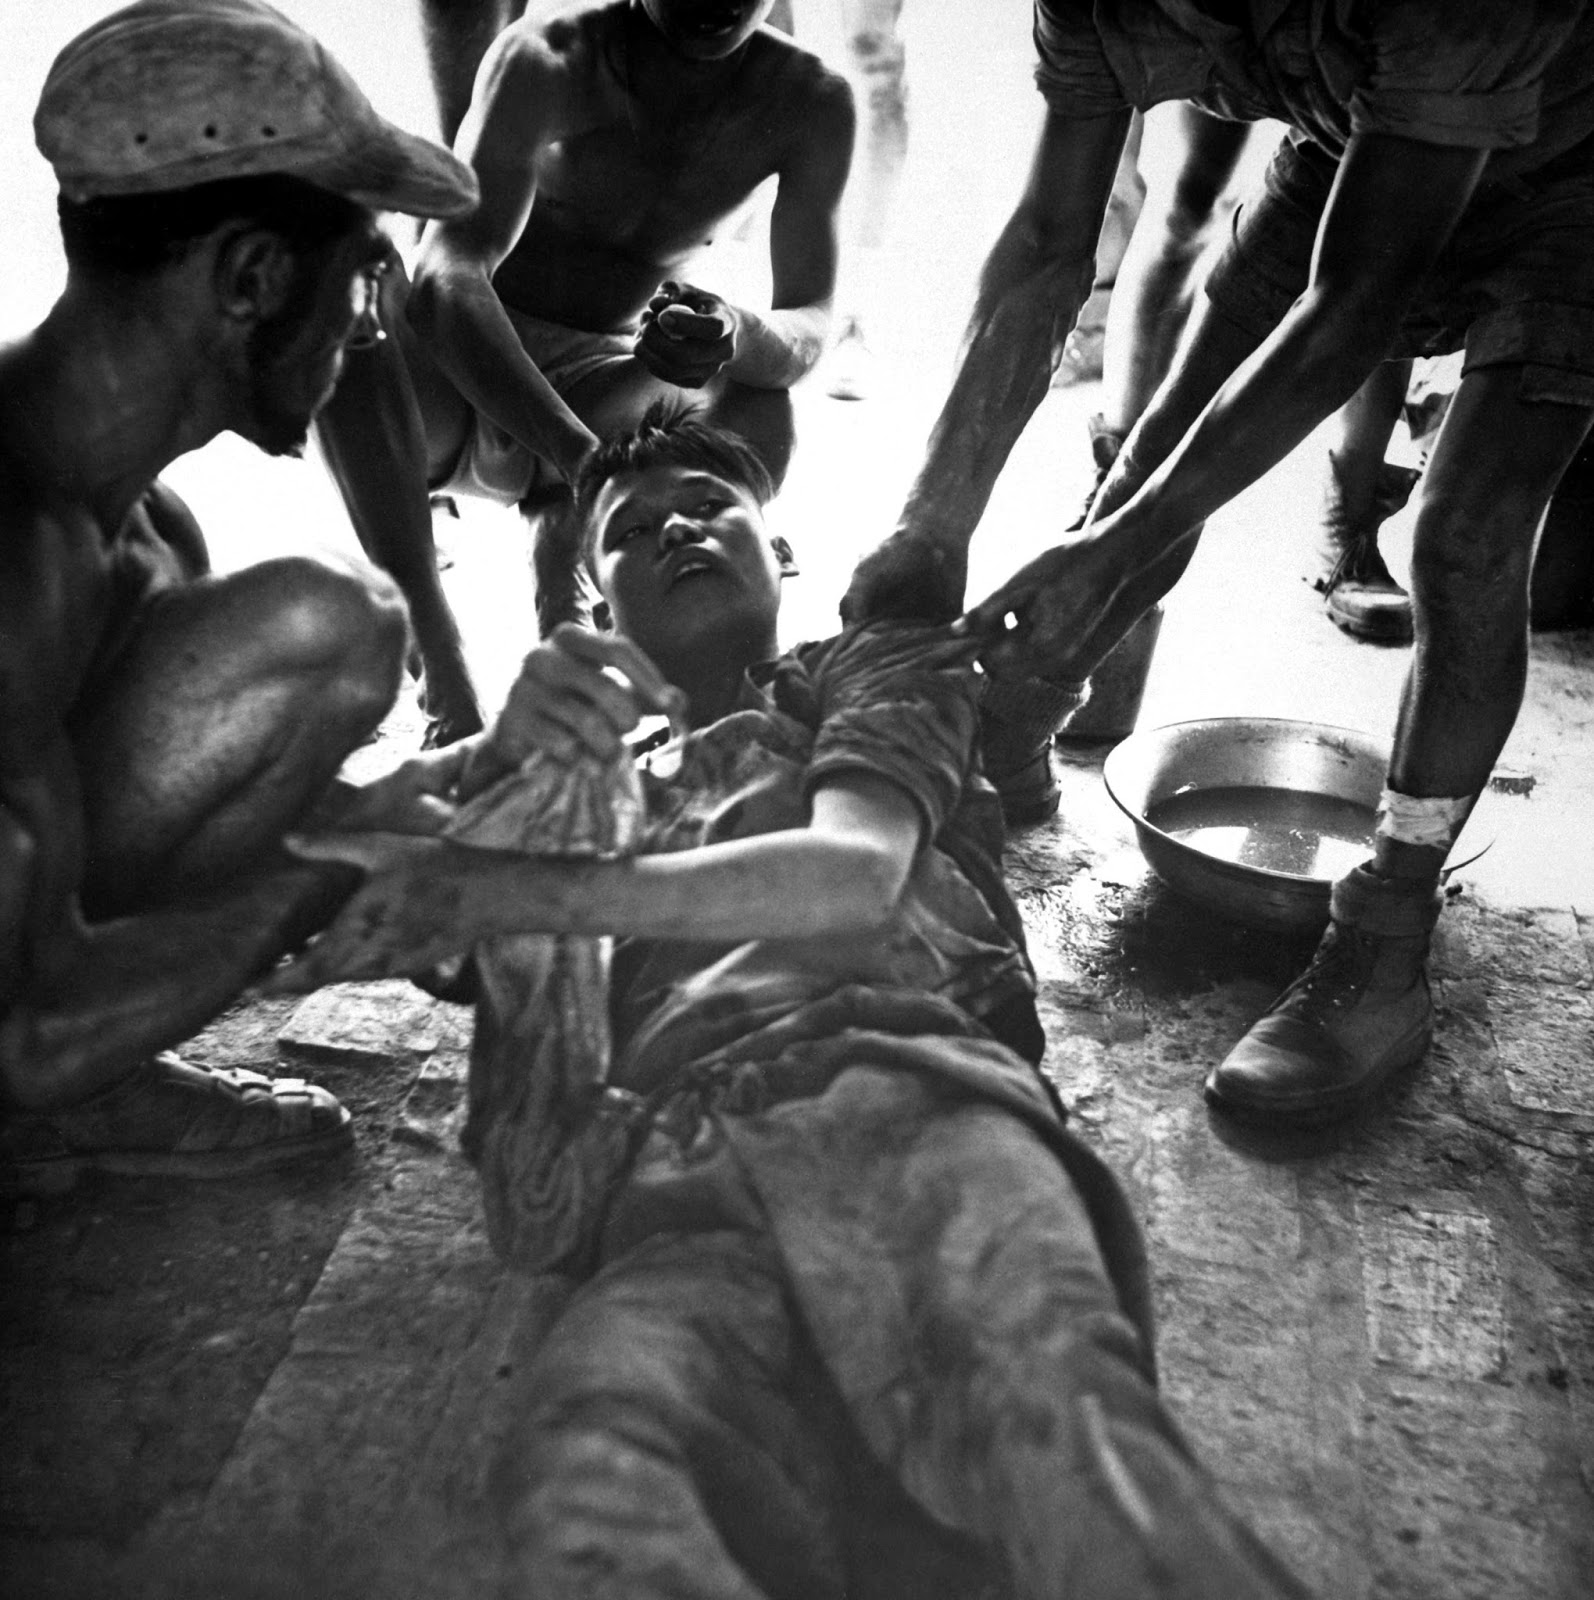 36 Amazing Historical Pictures. #9 Is Unbelievable - A wounded Vietminh prisoner is given first aid by Franco Vietnamese medics after firefight near Hung Yen, south of Hanoi, Vietnam (1954)